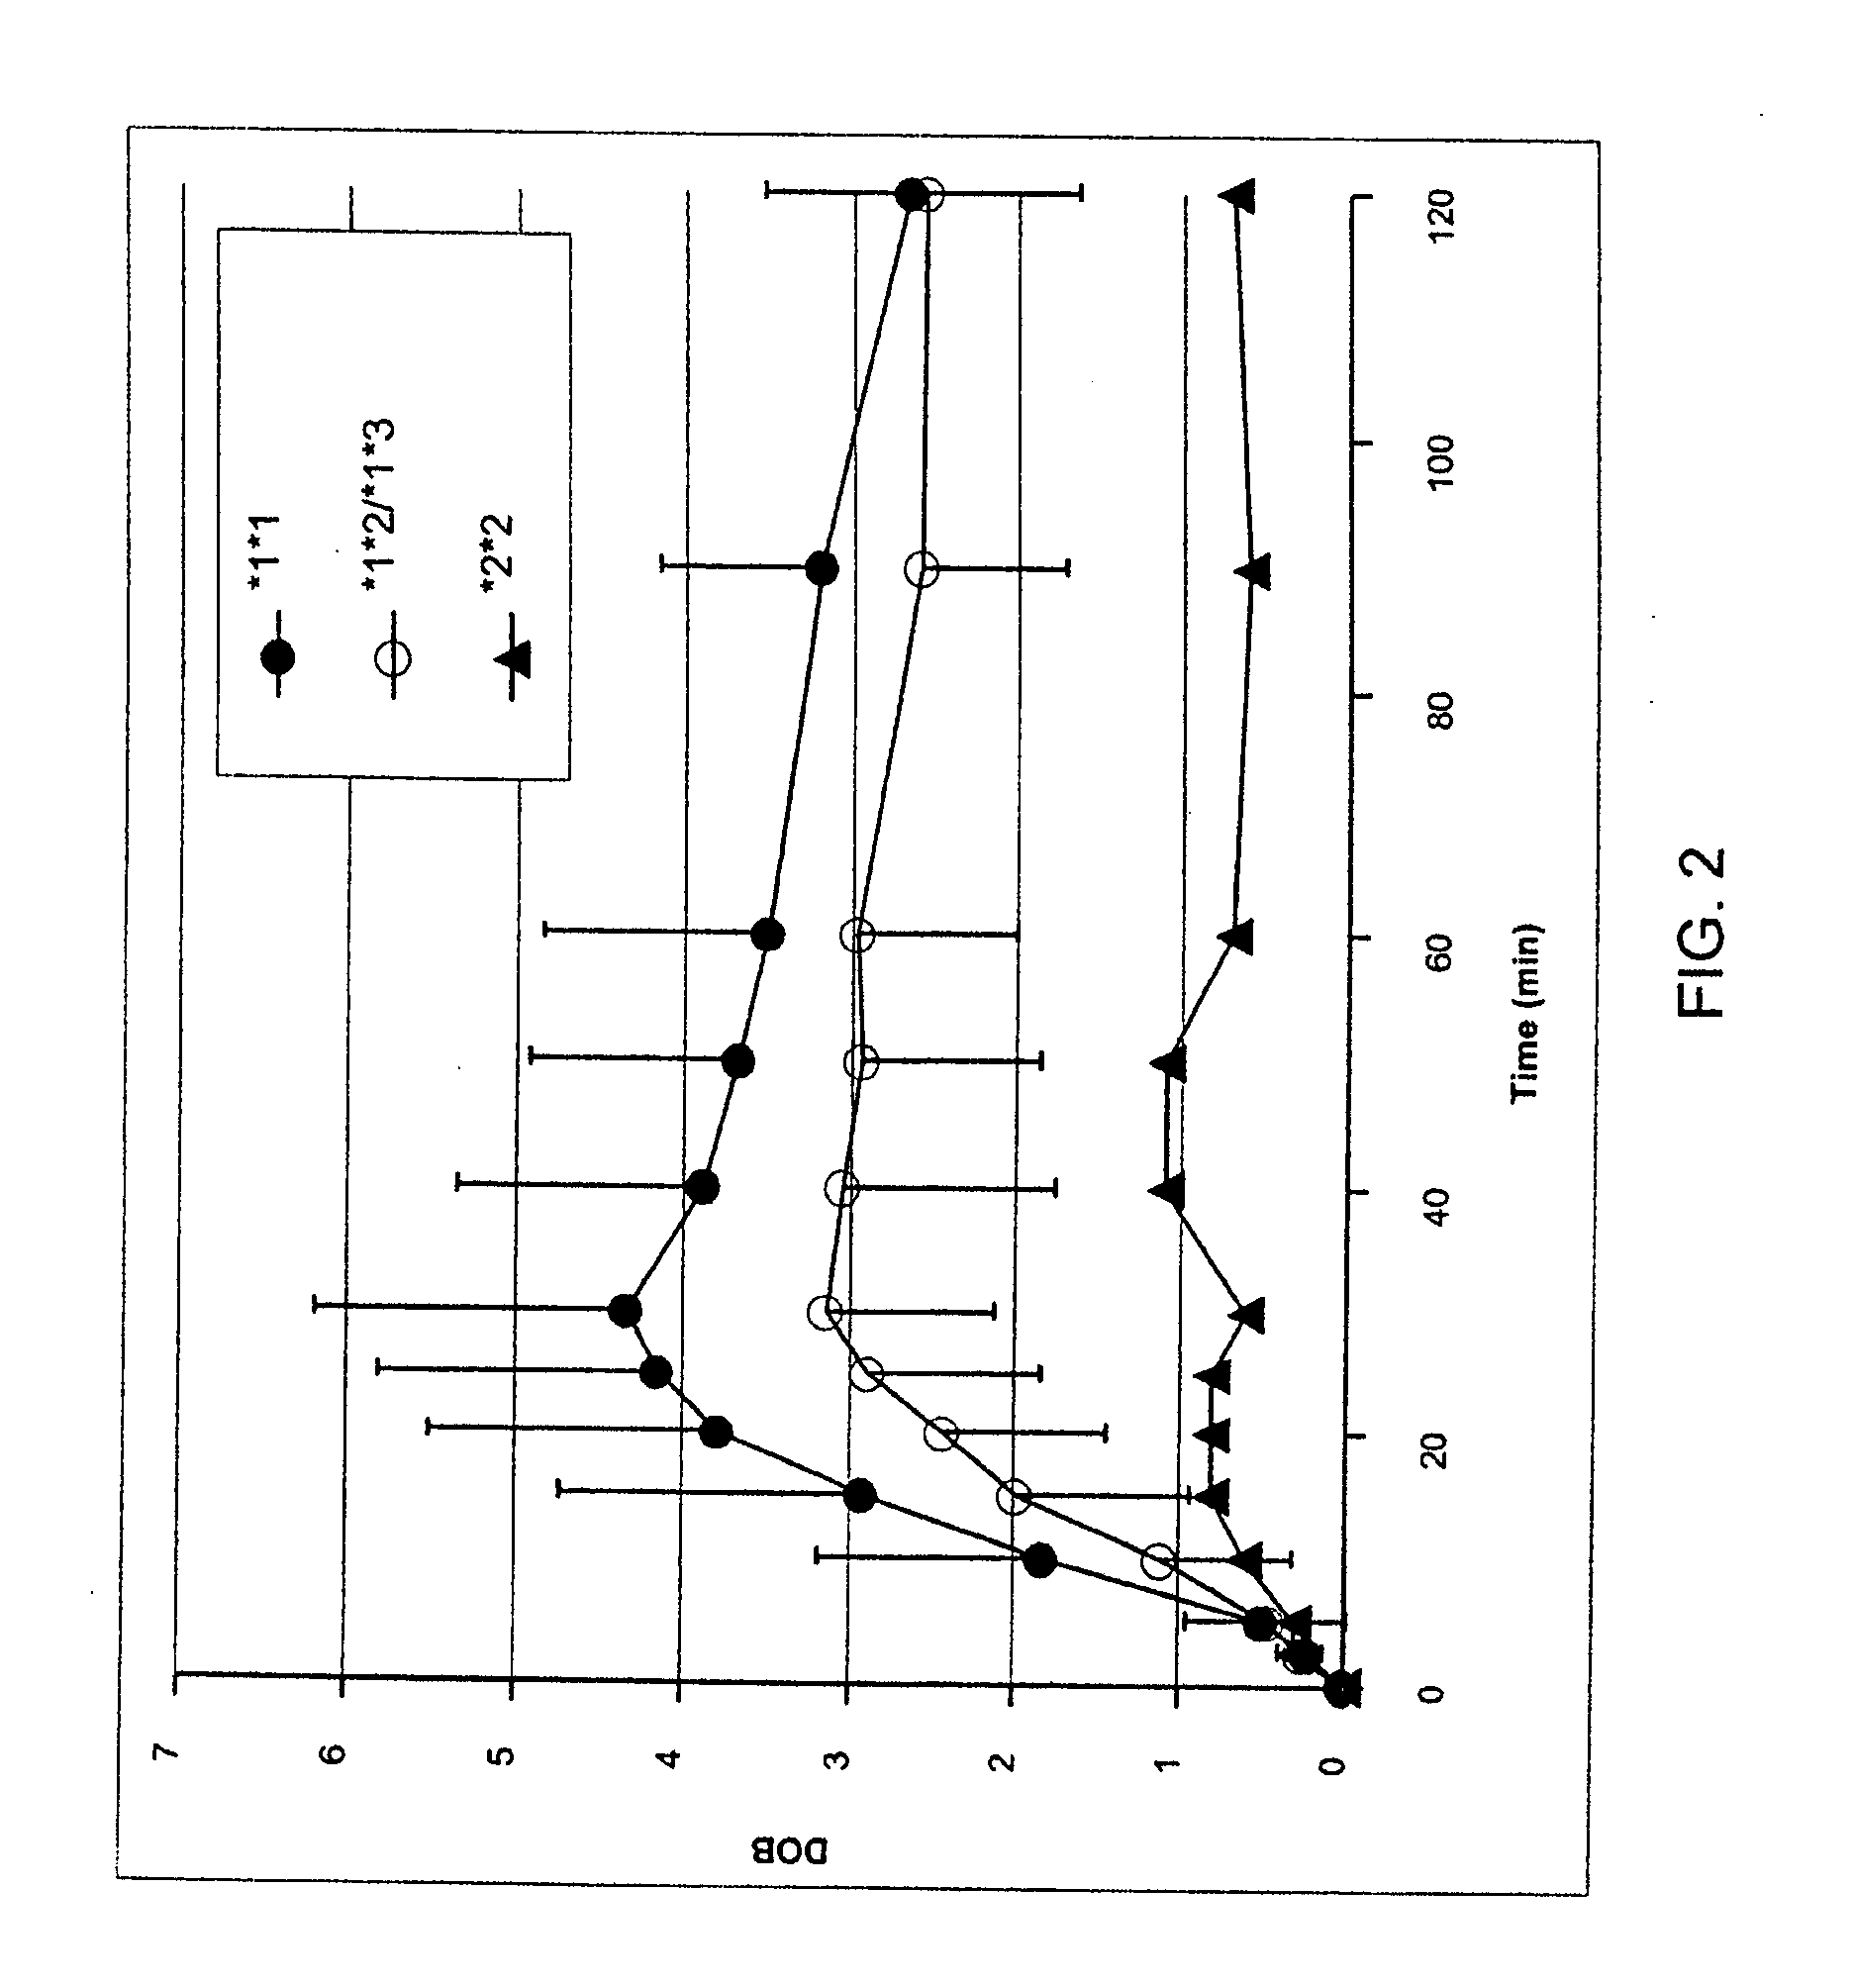 Method and composition to evaluate cytochrome p450 2c19 isoenzyme activity using a breath test